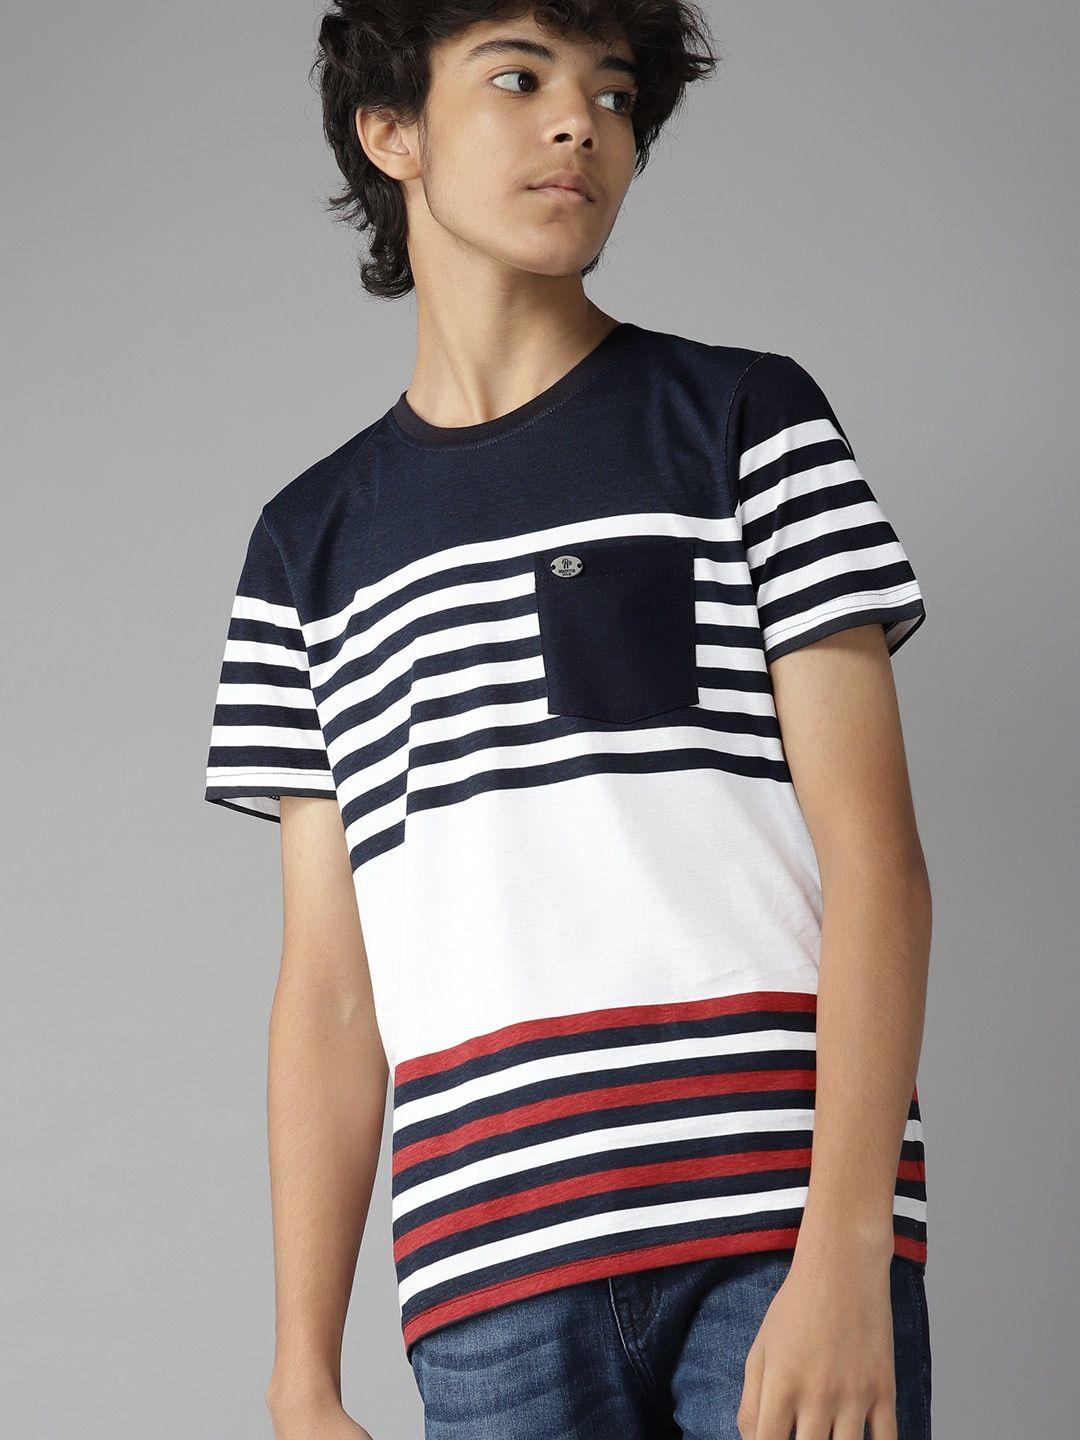 uth by roadster boys white & navy blue striped cotton t-shirt with contrast pocket